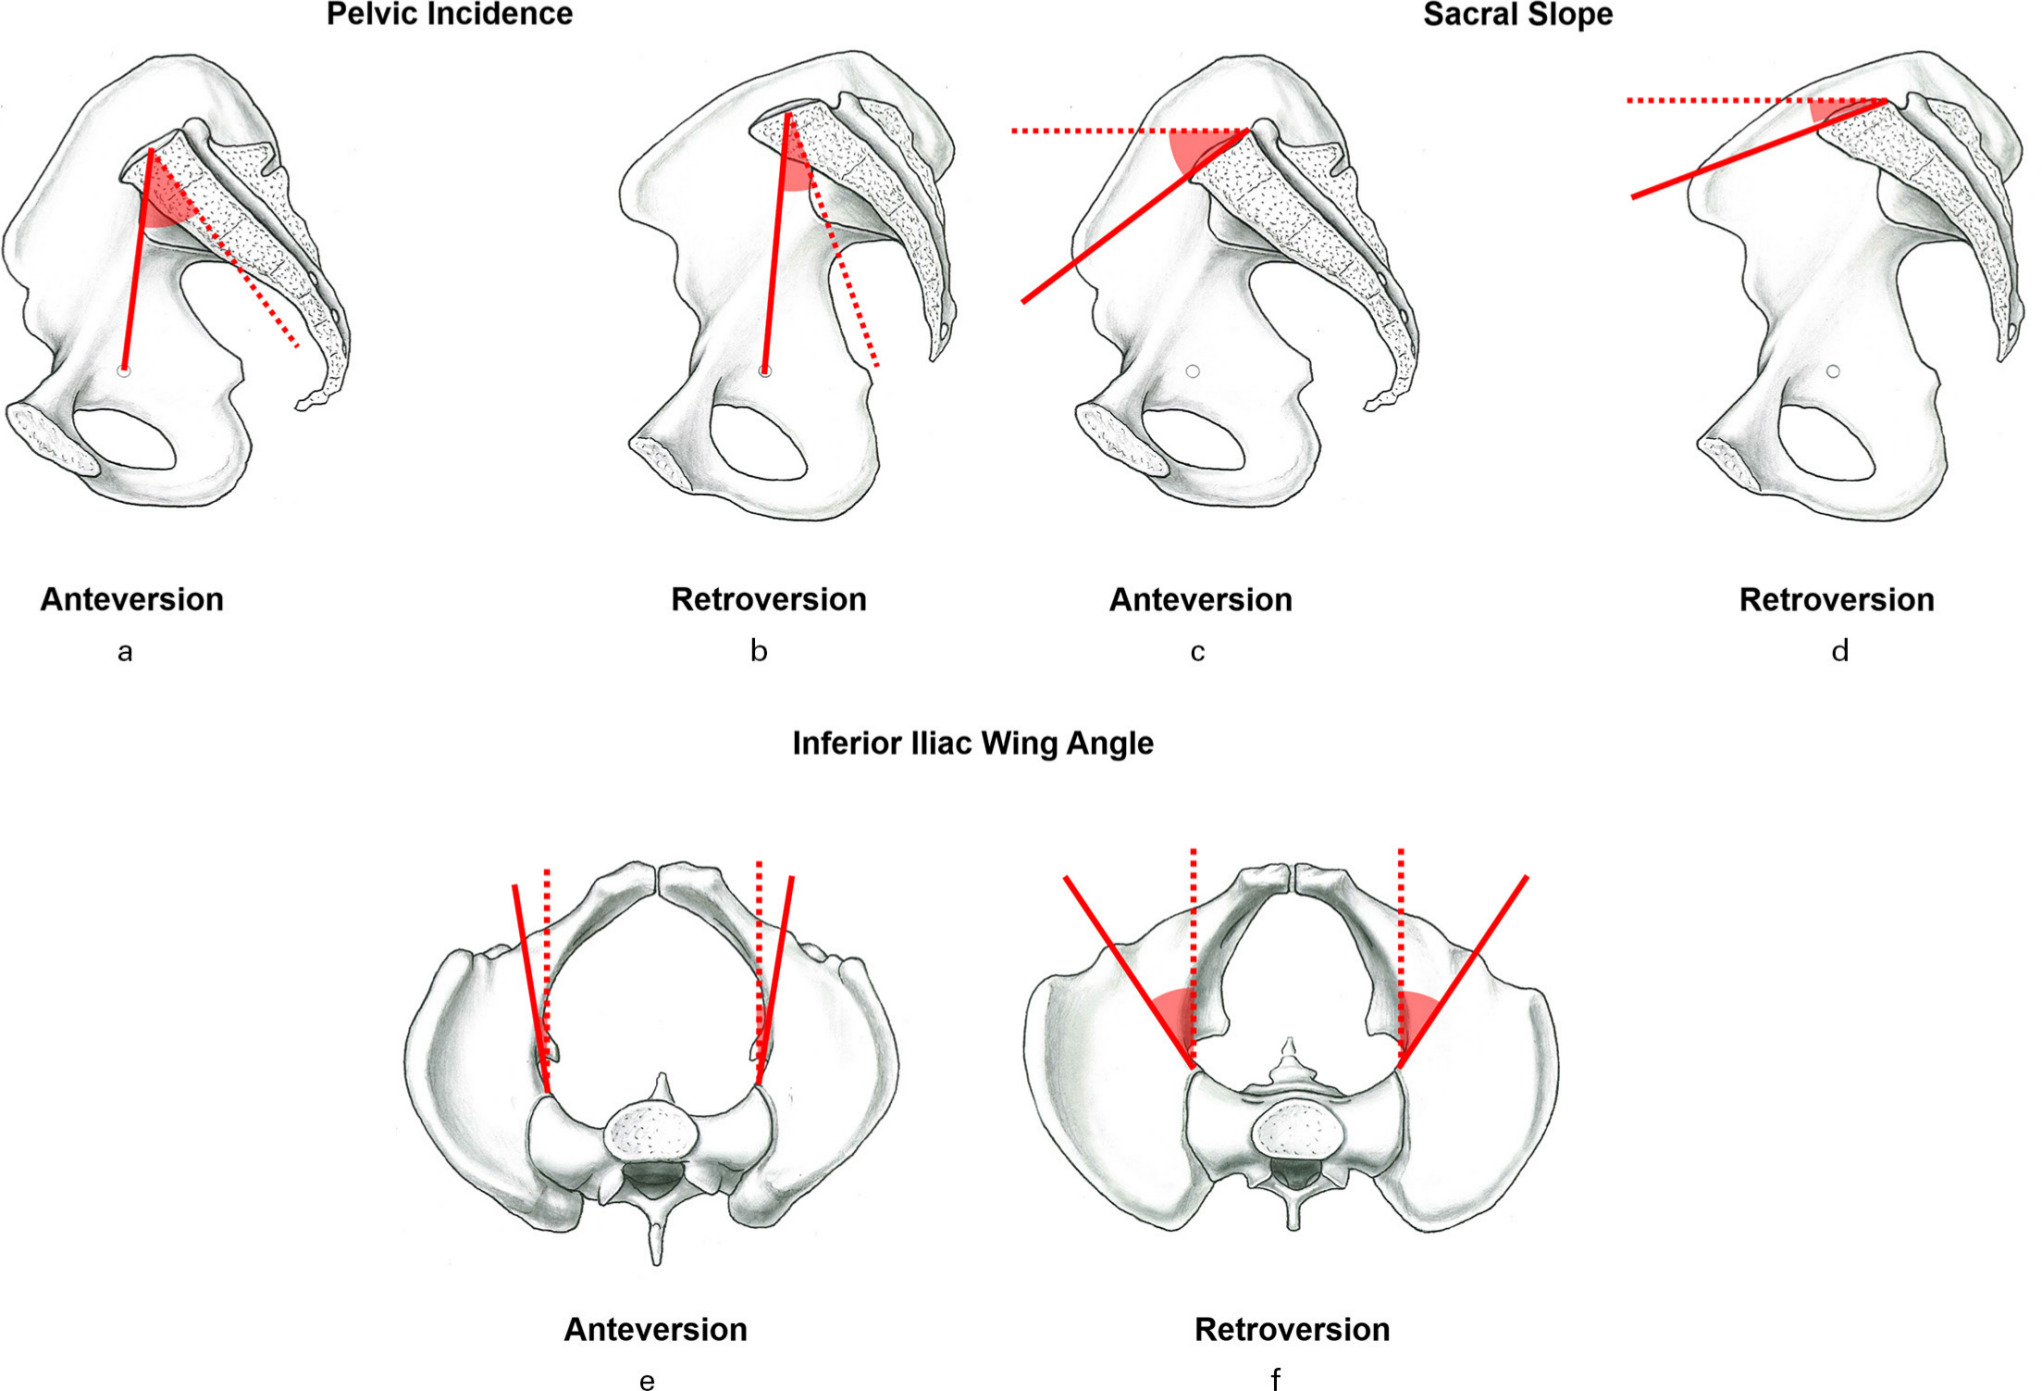 Fig. 3 
            a) and b) Sagittal profiles of a pelvic bone of a patient with a) and c) high acetabular anteversion, and b) and d) a patient with acetabular retroversion (AR). e) Hips with AR have more external rotation of the iliac wing compared to f) hip dysplasia.
          